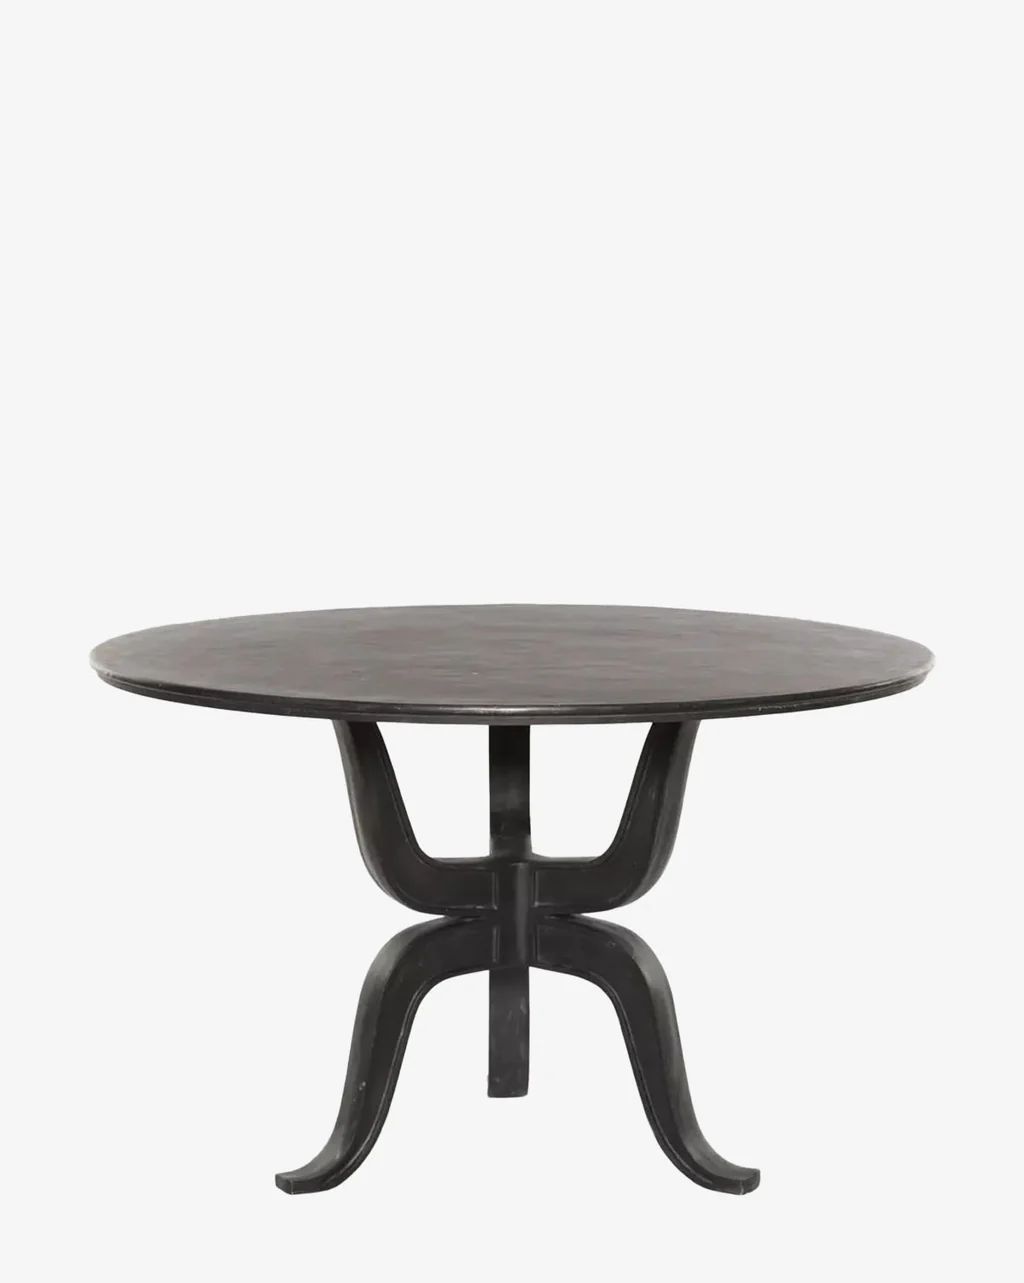 Romilly Dining Table | McGee & Co.